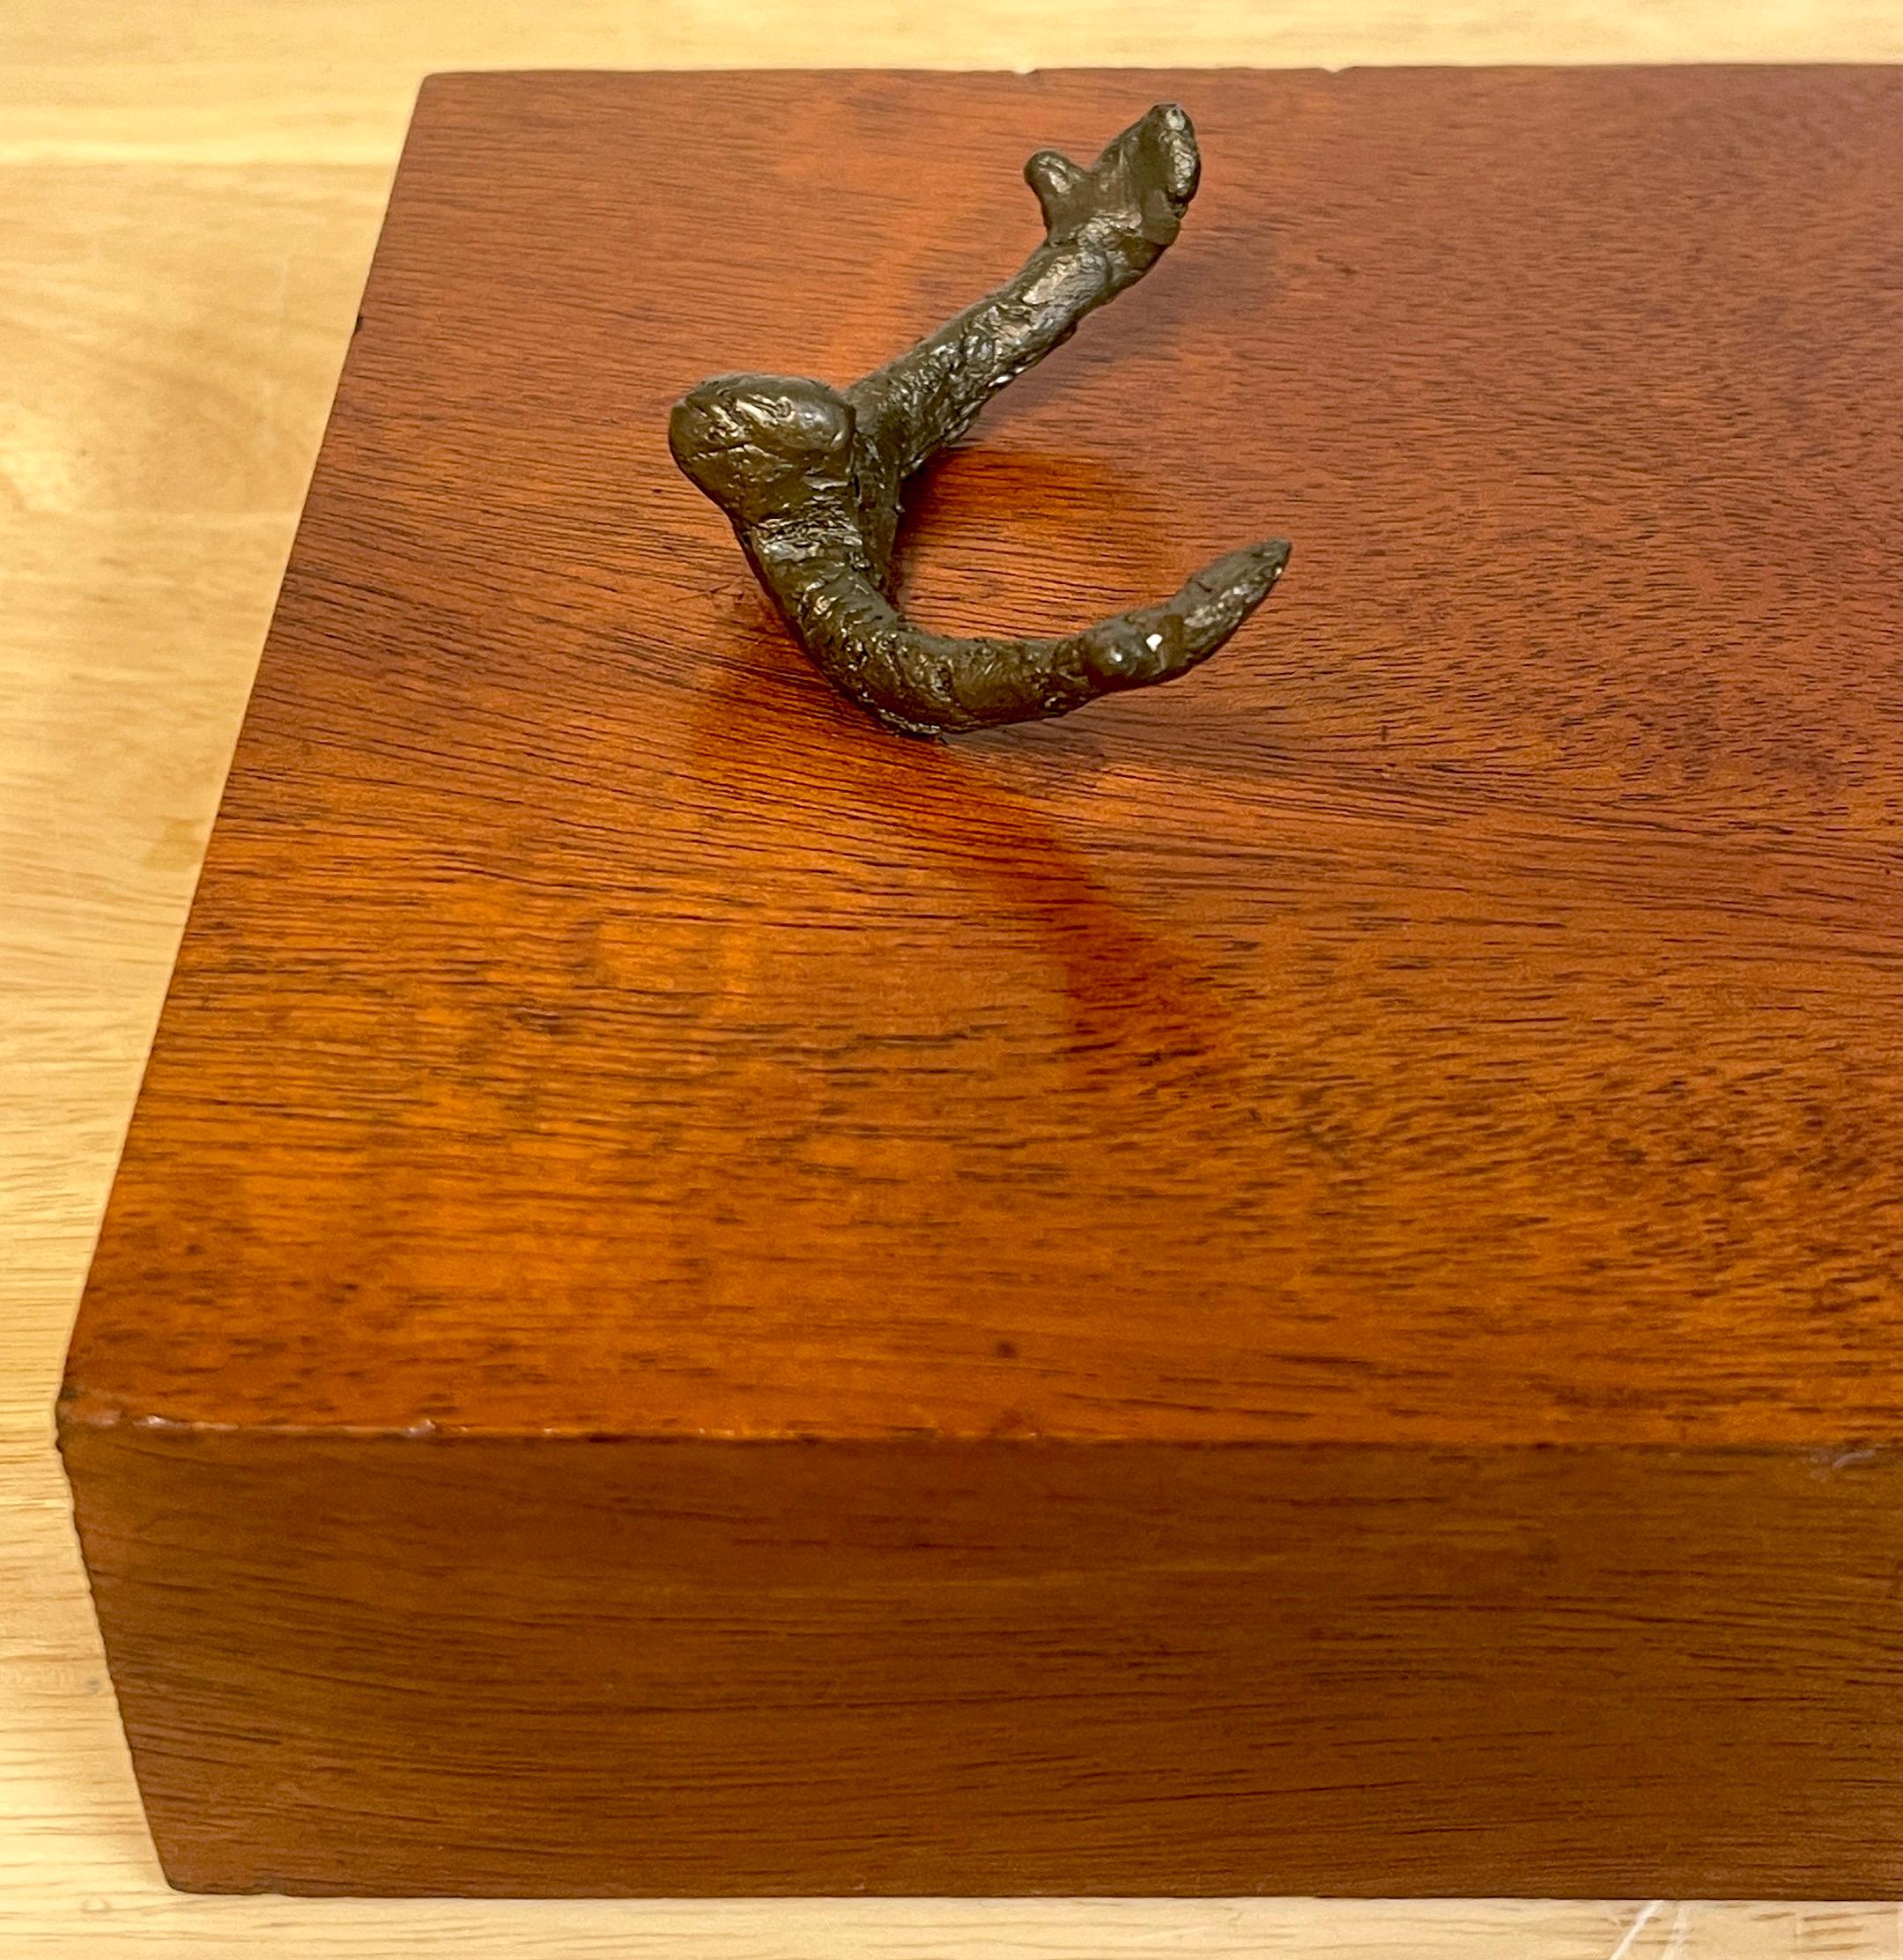 20th Century Brutalist Bronze Table Sculpture 'I'll Catch You', Unsigned For Sale